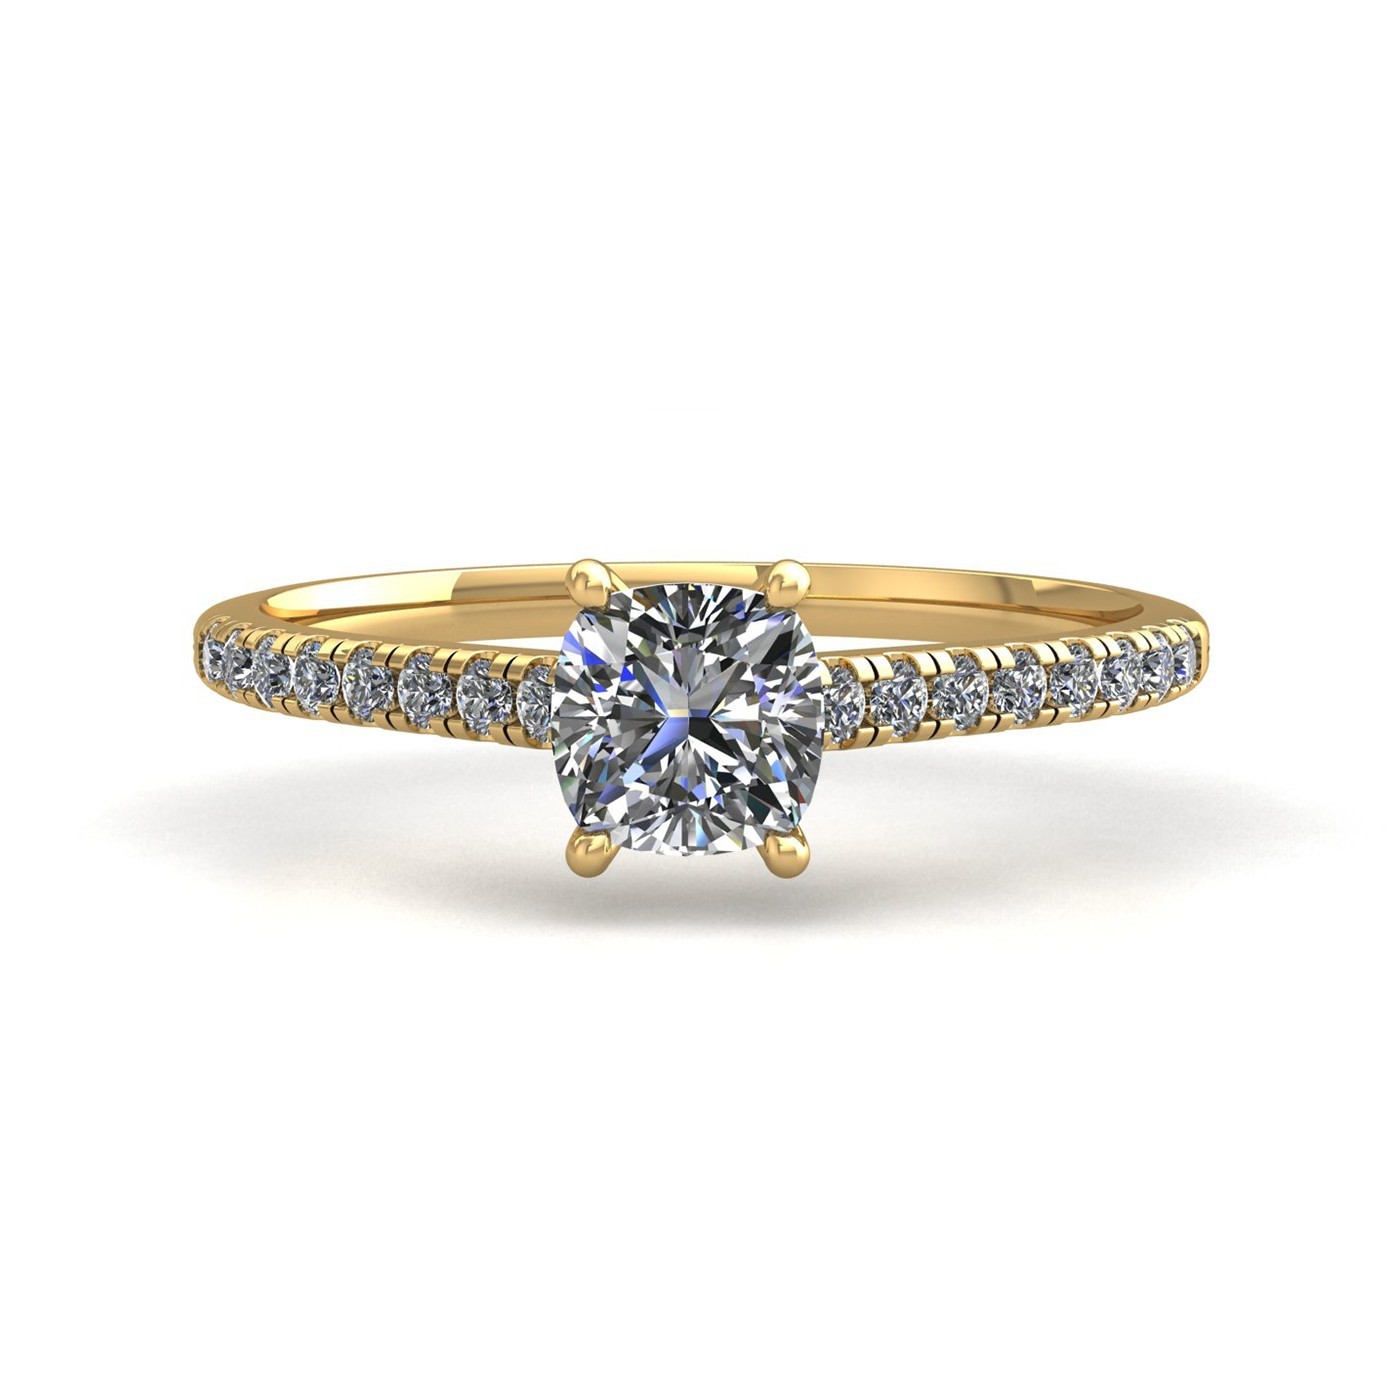 18k yellow gold 1.20ct 4 prongs cushion cut diamond engagement ring with whisper thin pavÉ set band Photos & images